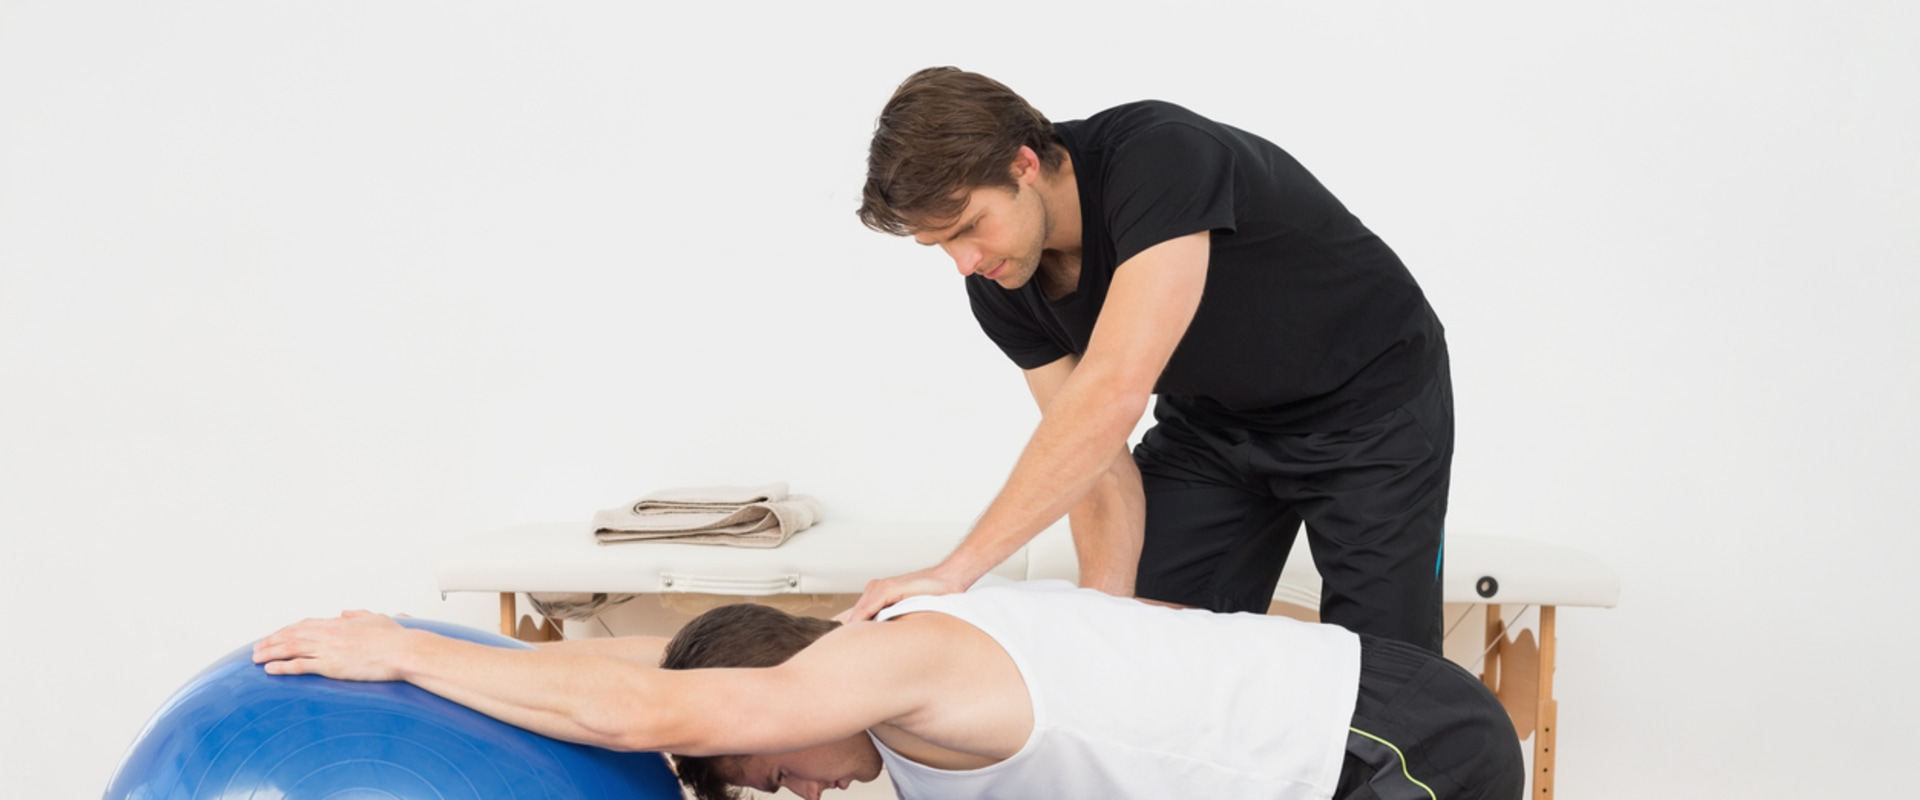 How Long Does Physical Therapy Last?